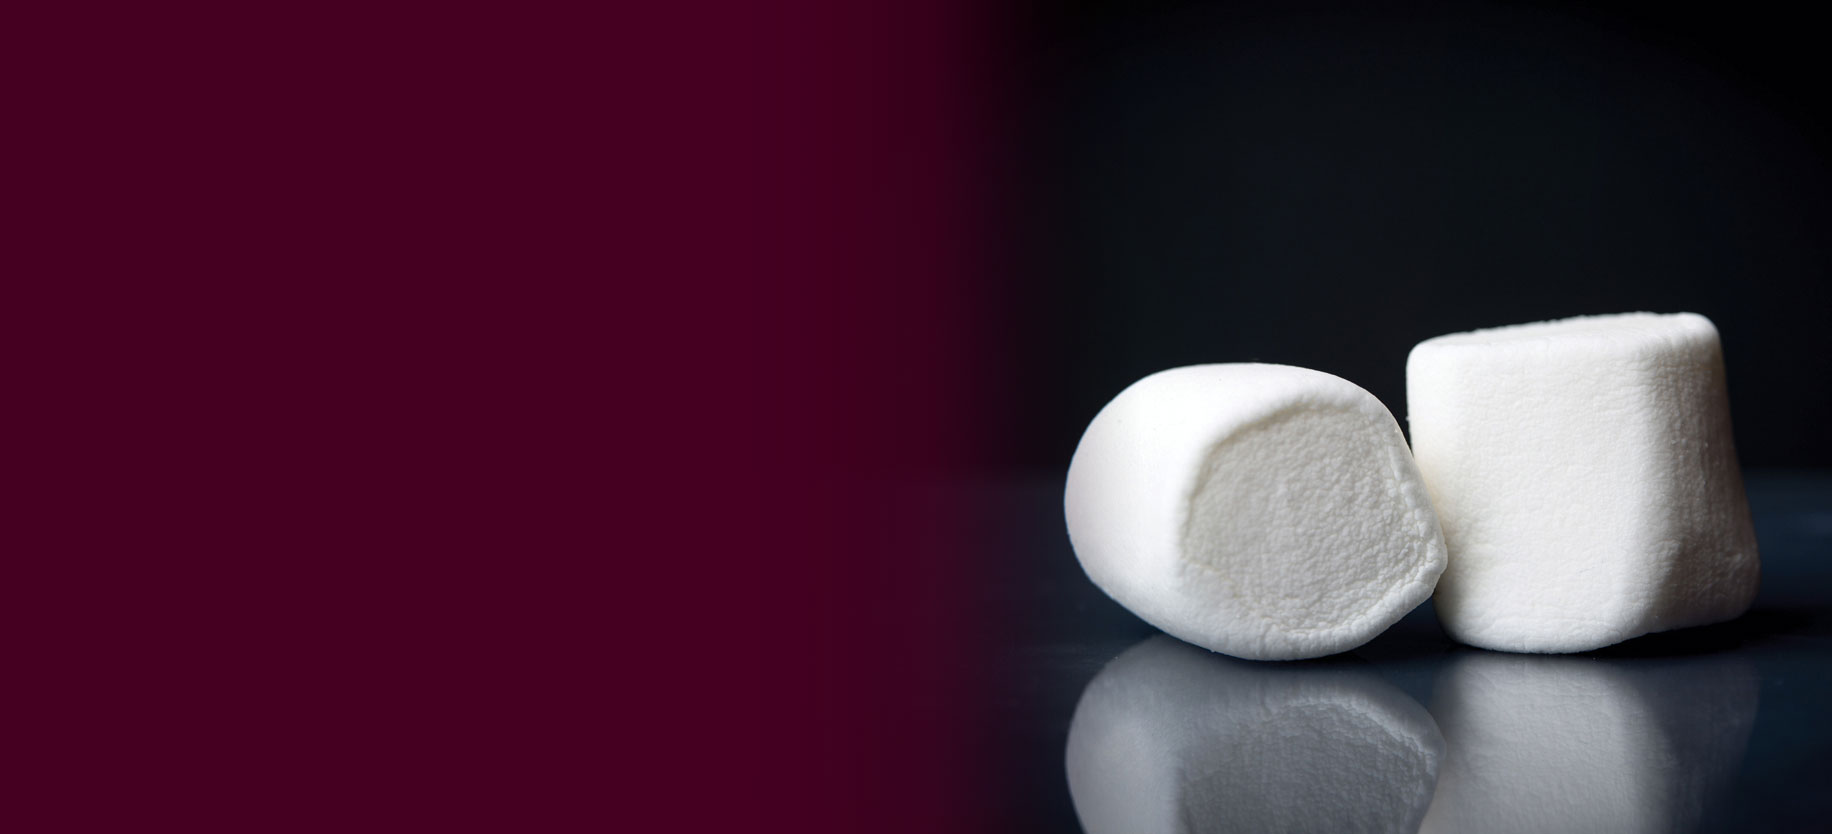 A close-up of two marshmallows